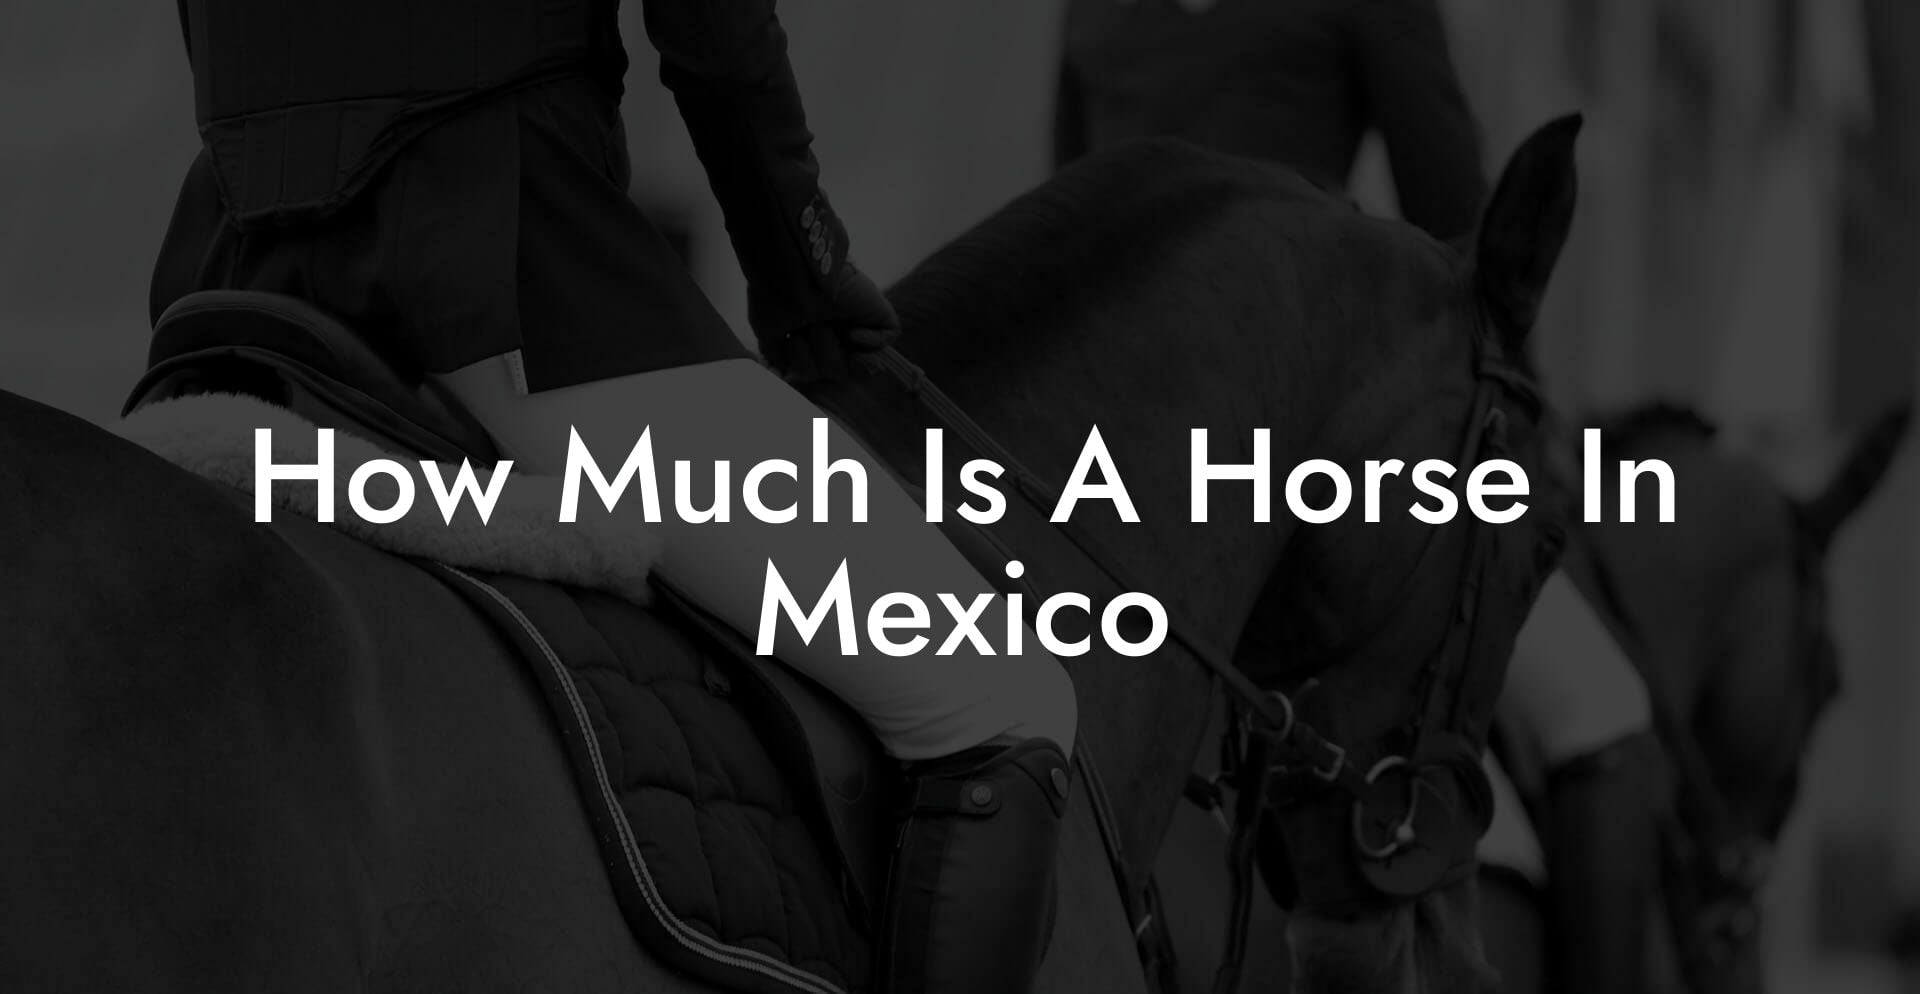 How Much Is A Horse In Mexico